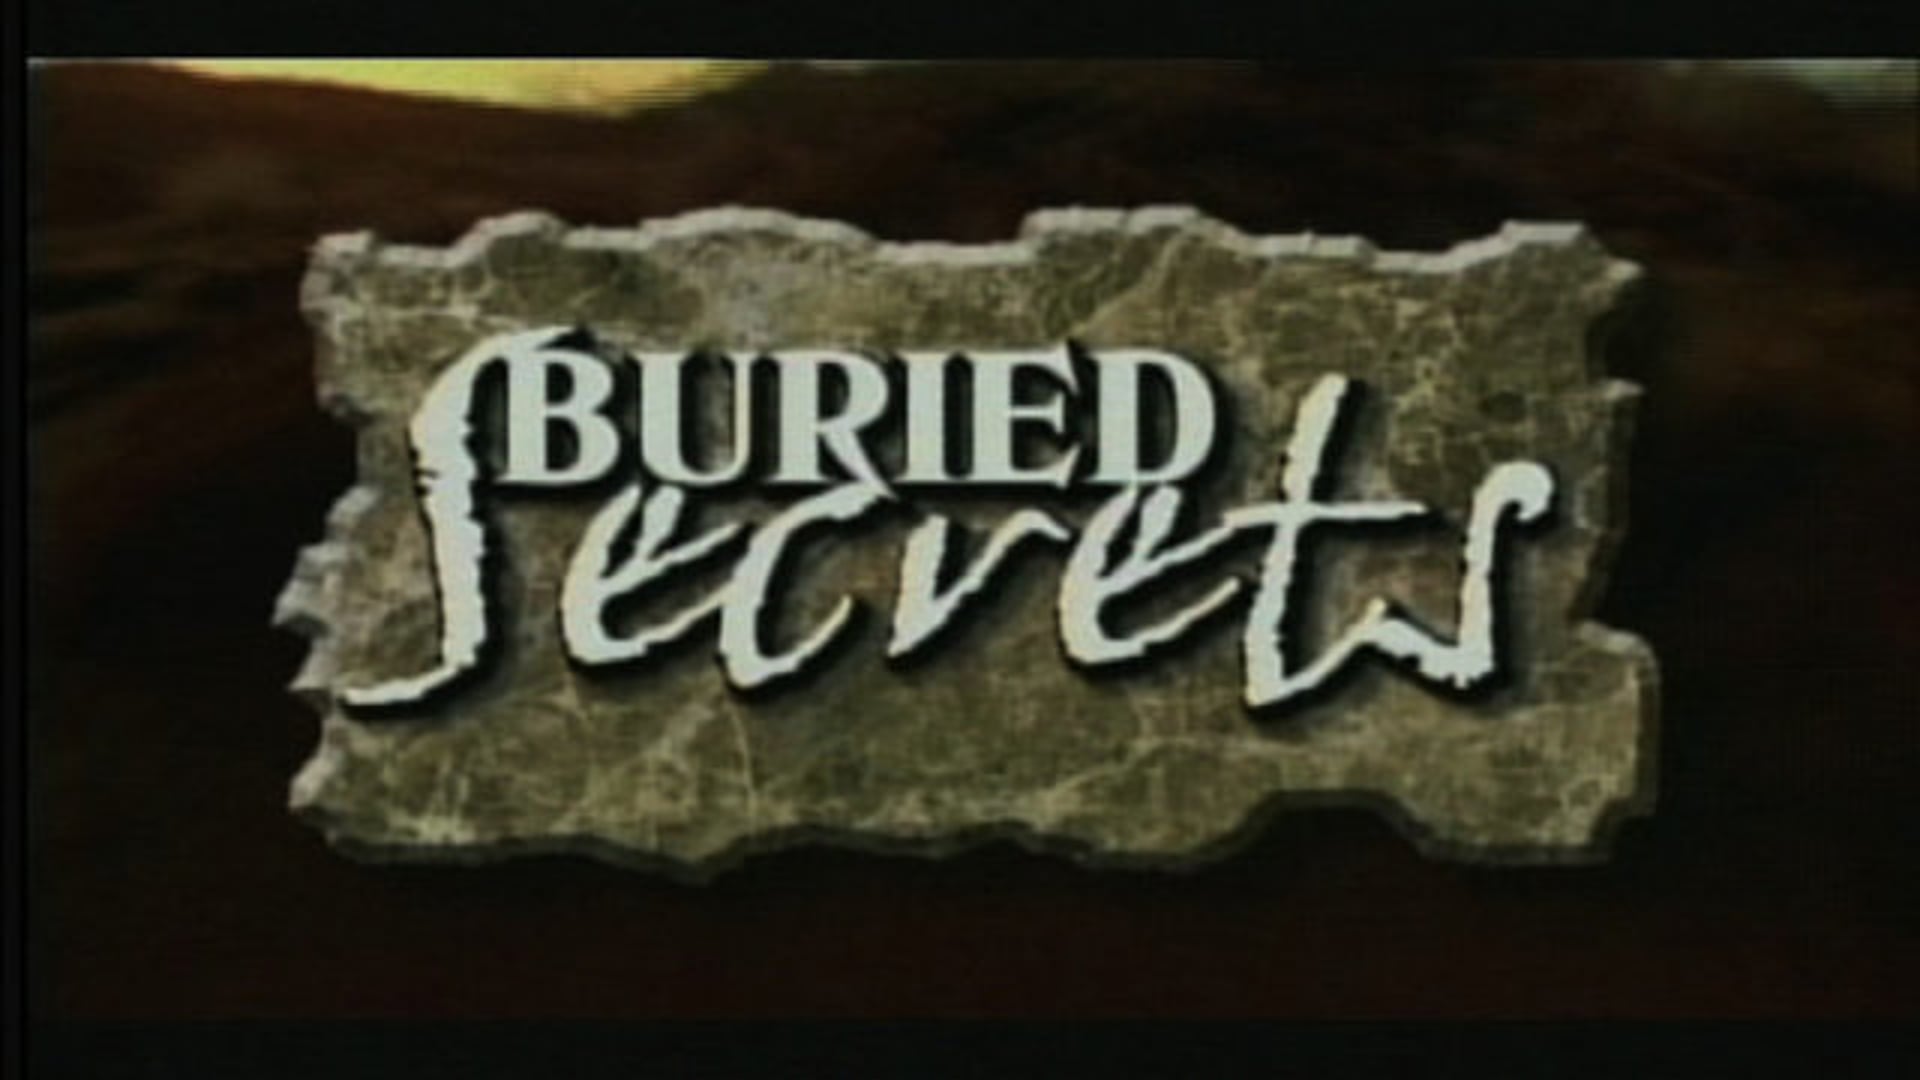 National Geographic Channel - Buried Secrets